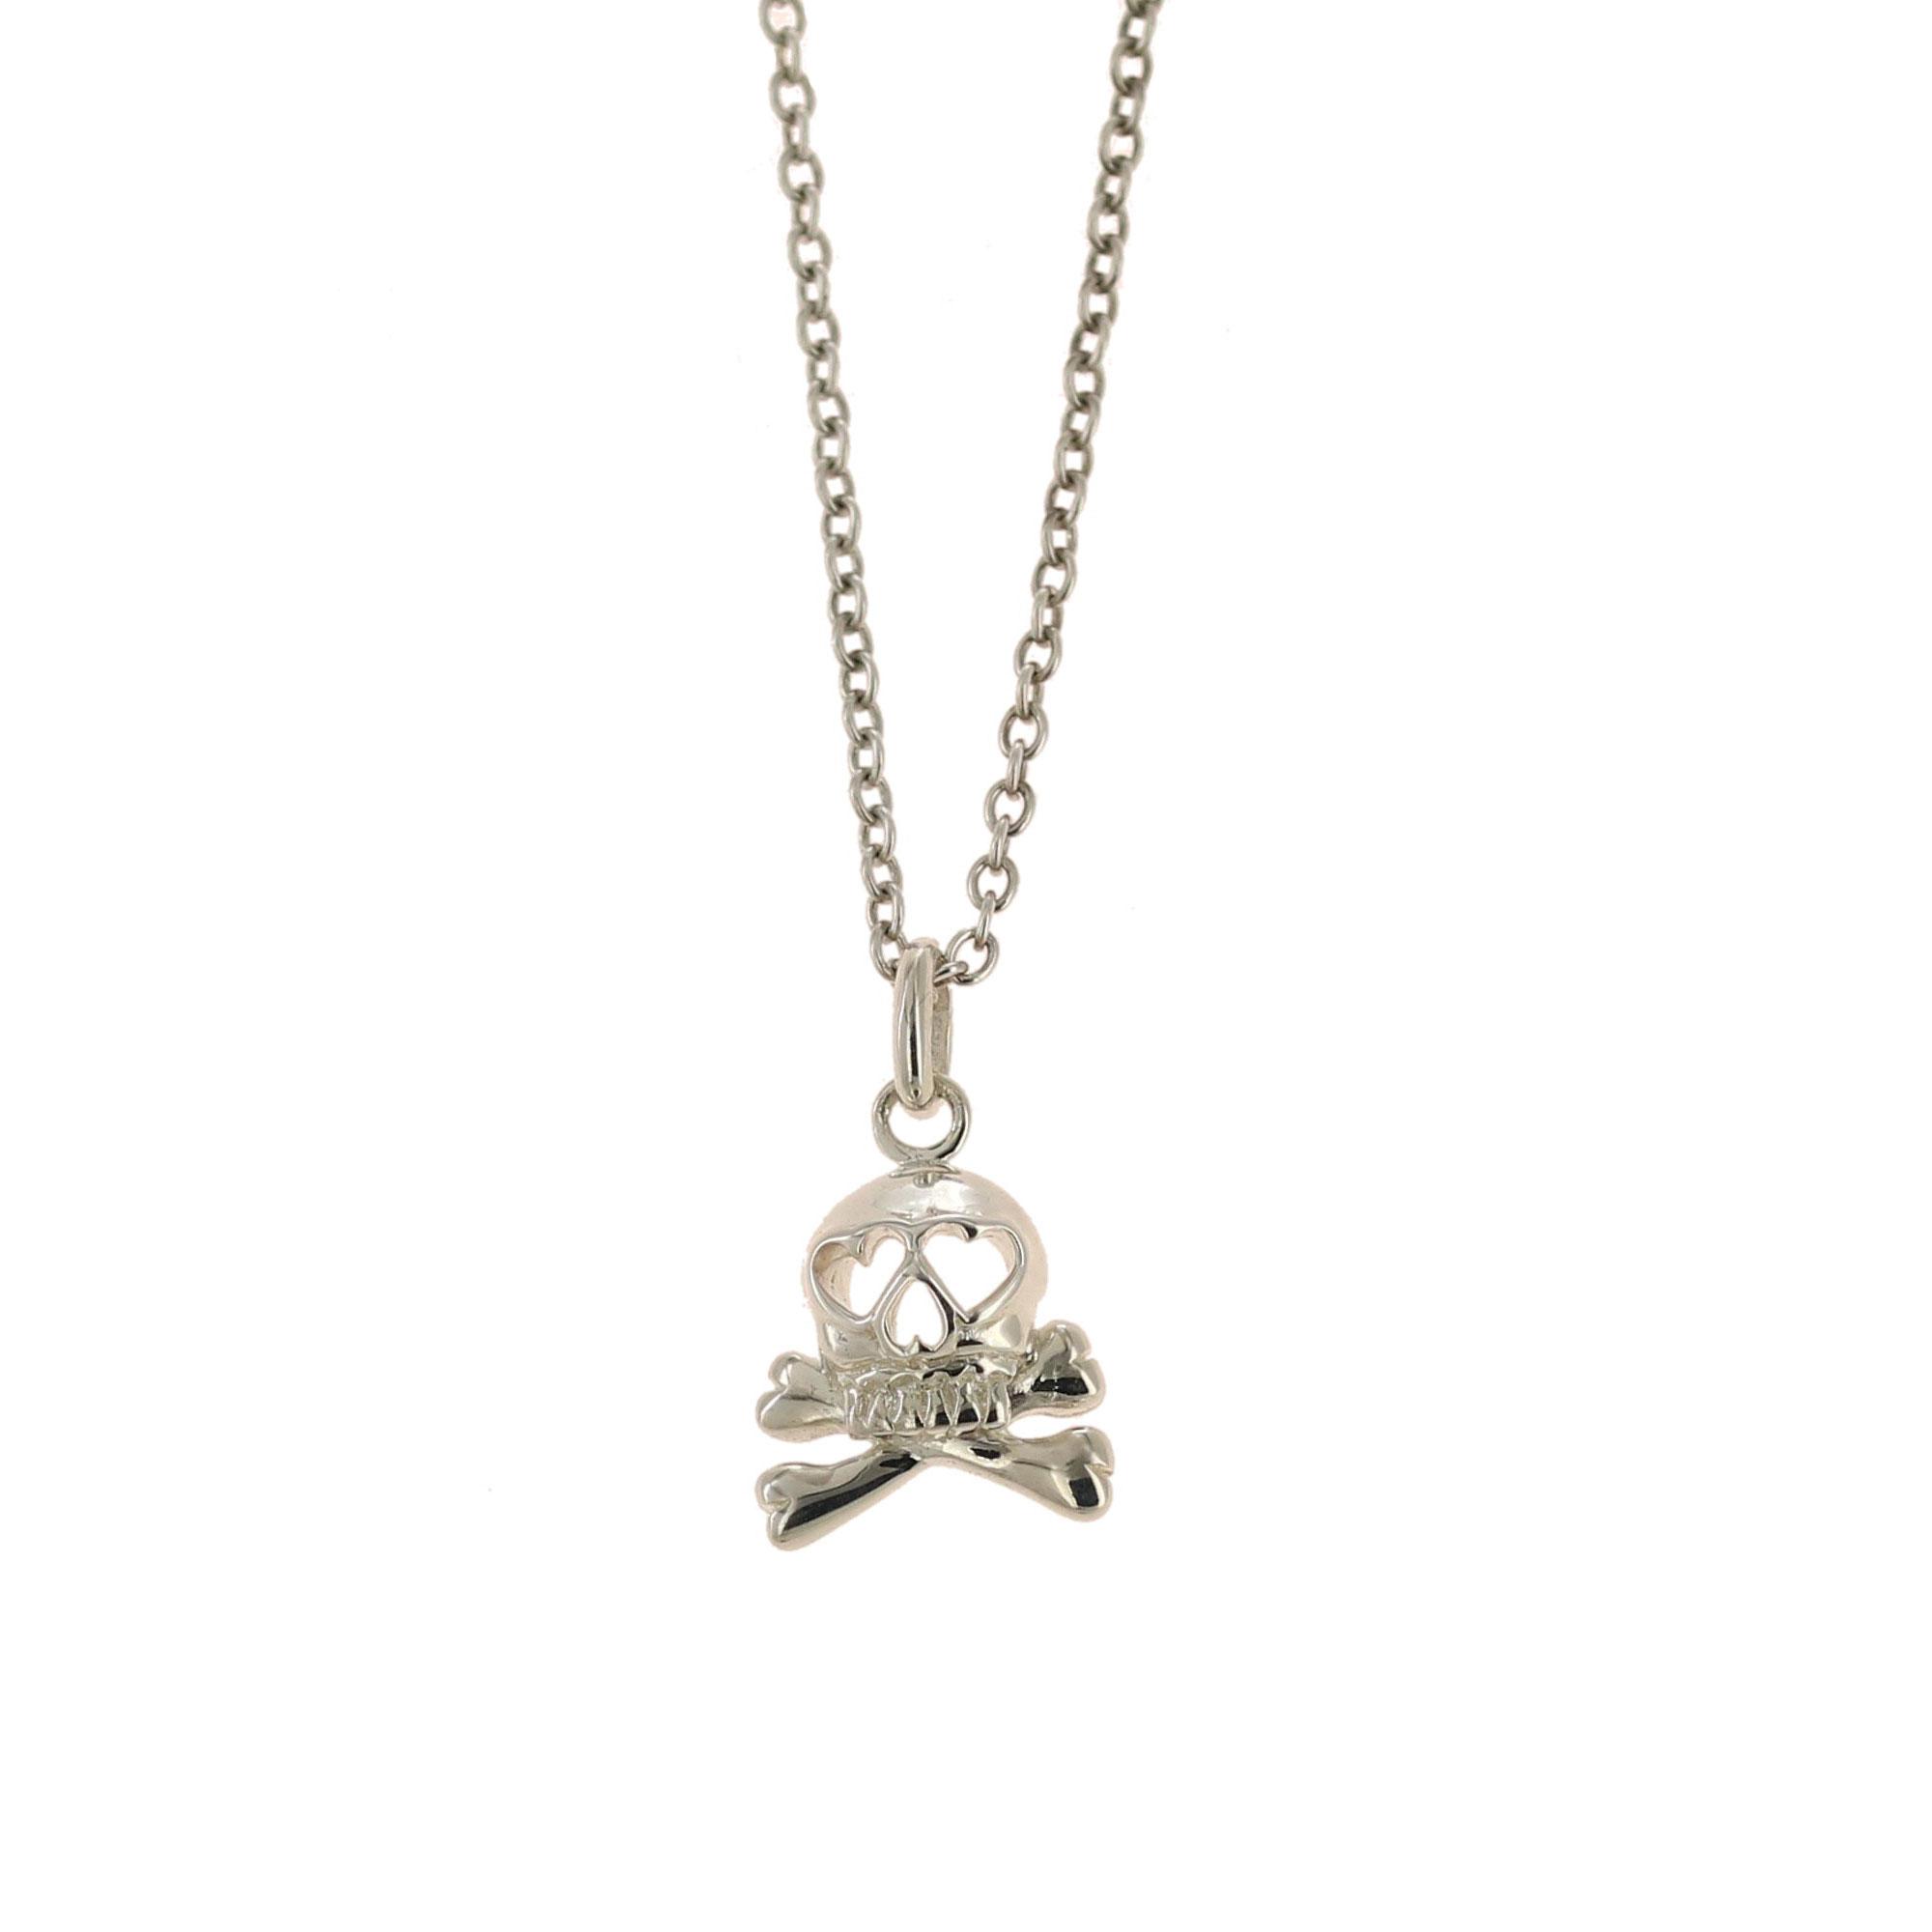 Skull and Bones Necklace or Pendant